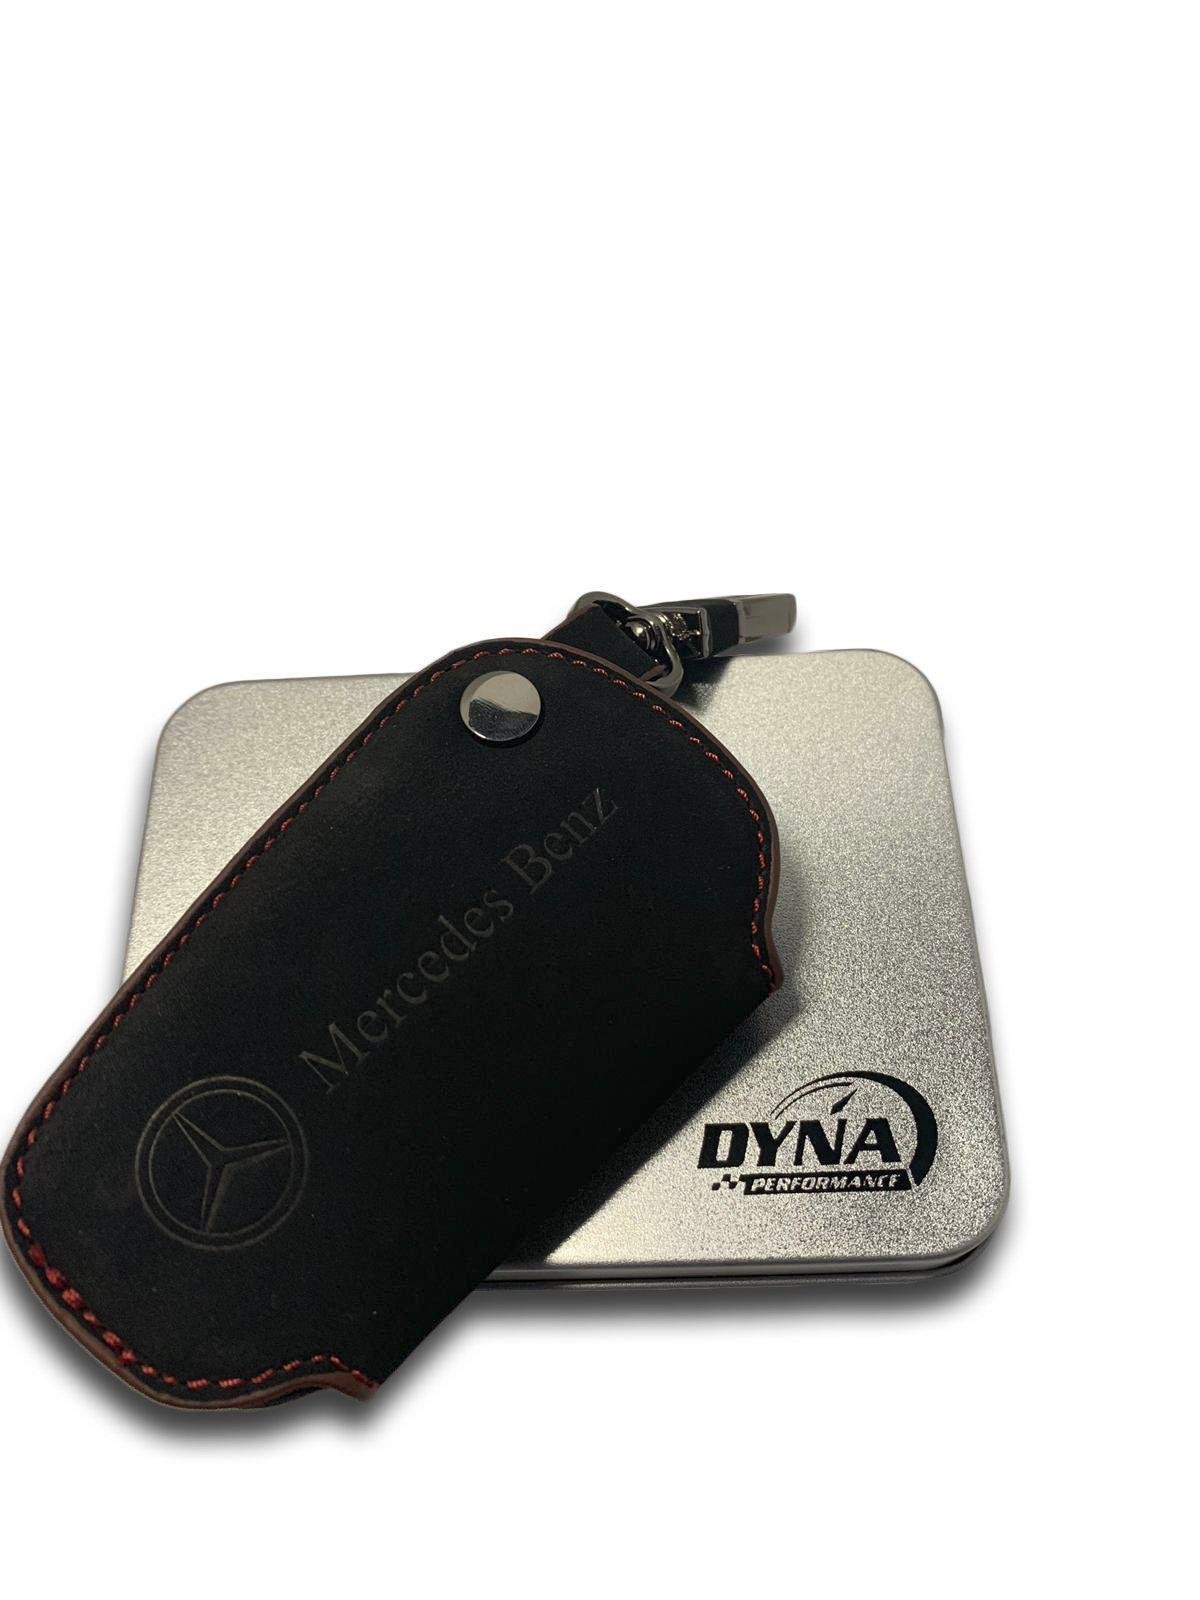 F Generation BMW M Performance Leather Key Fob Cover